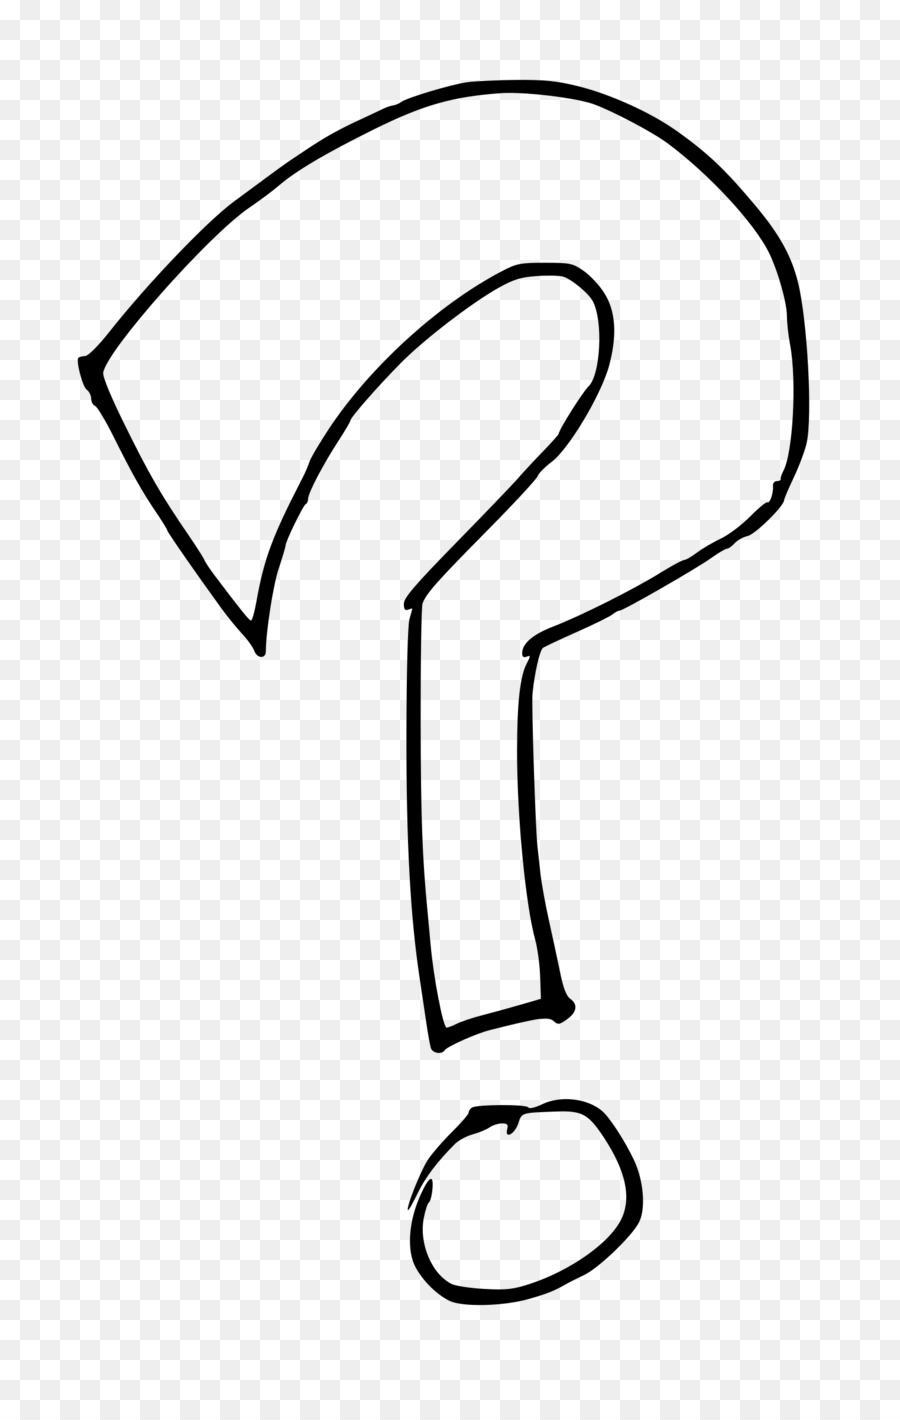 Question mark Clip art - question marks png download - 1522*2400 - Free Transparent Question Mark png Download.